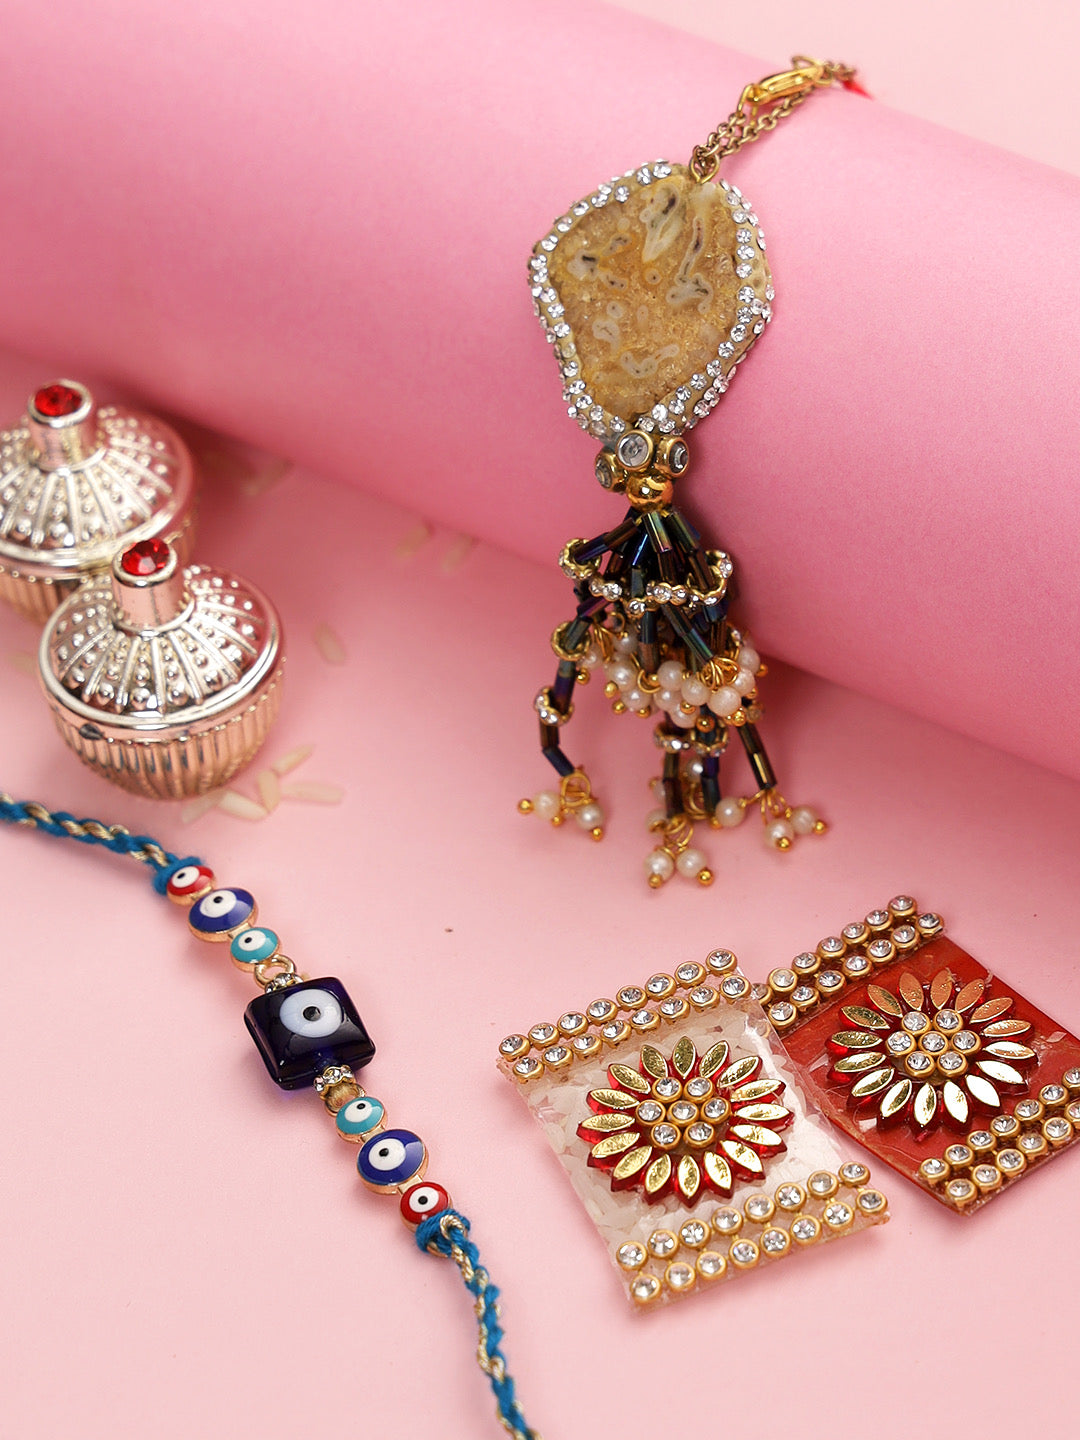 Hand Curated in style with Evils Eye and Natural Lucky Charm stone Bhaiya Bhabhi Rakhi set - Only Rakhi (RP22475)